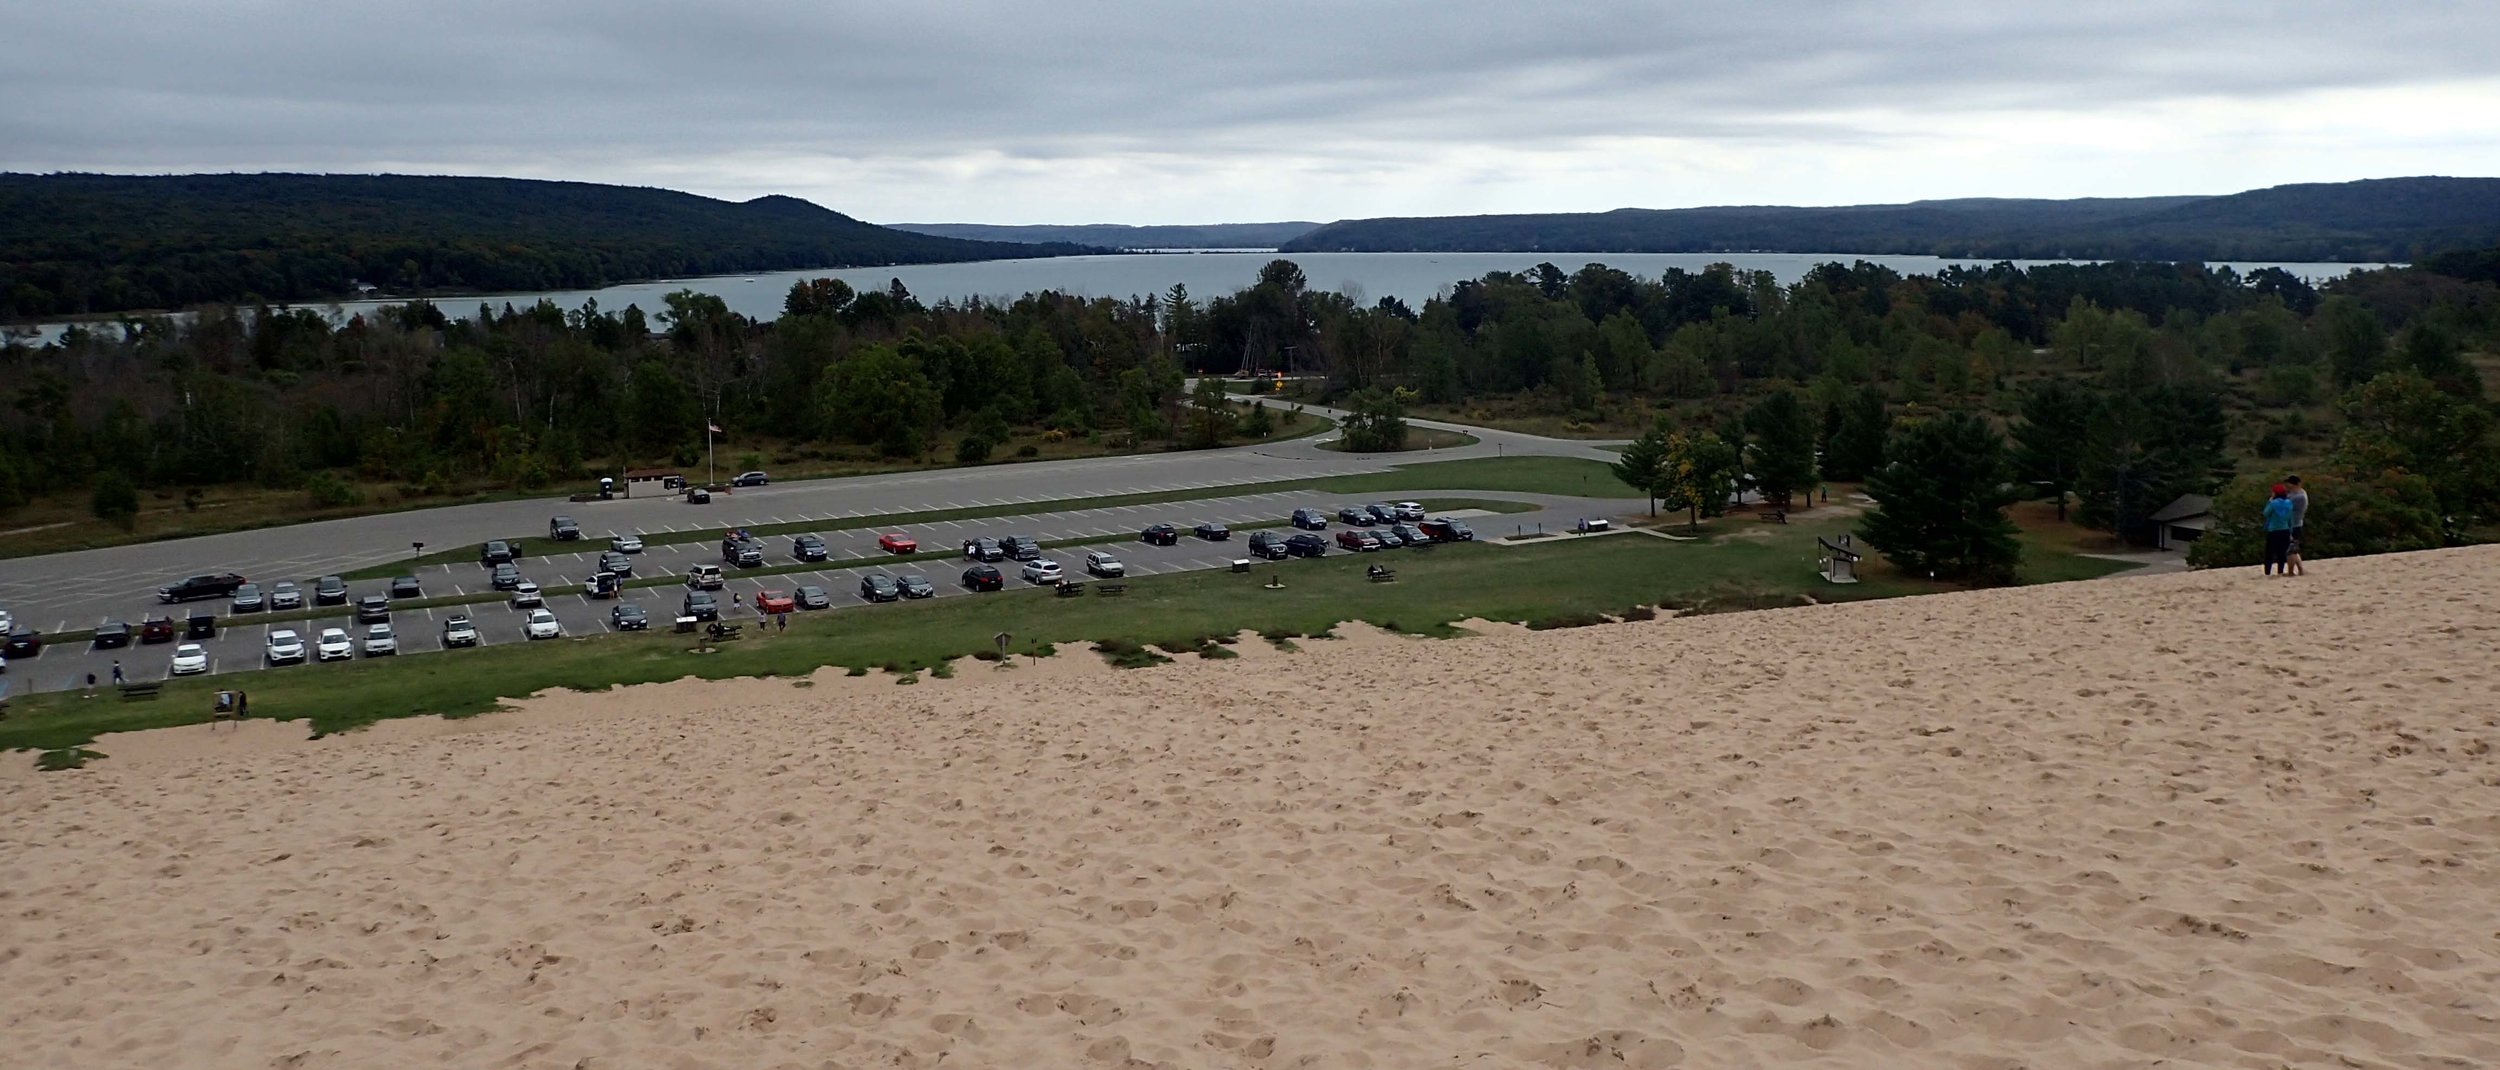 view from first dune.jpg